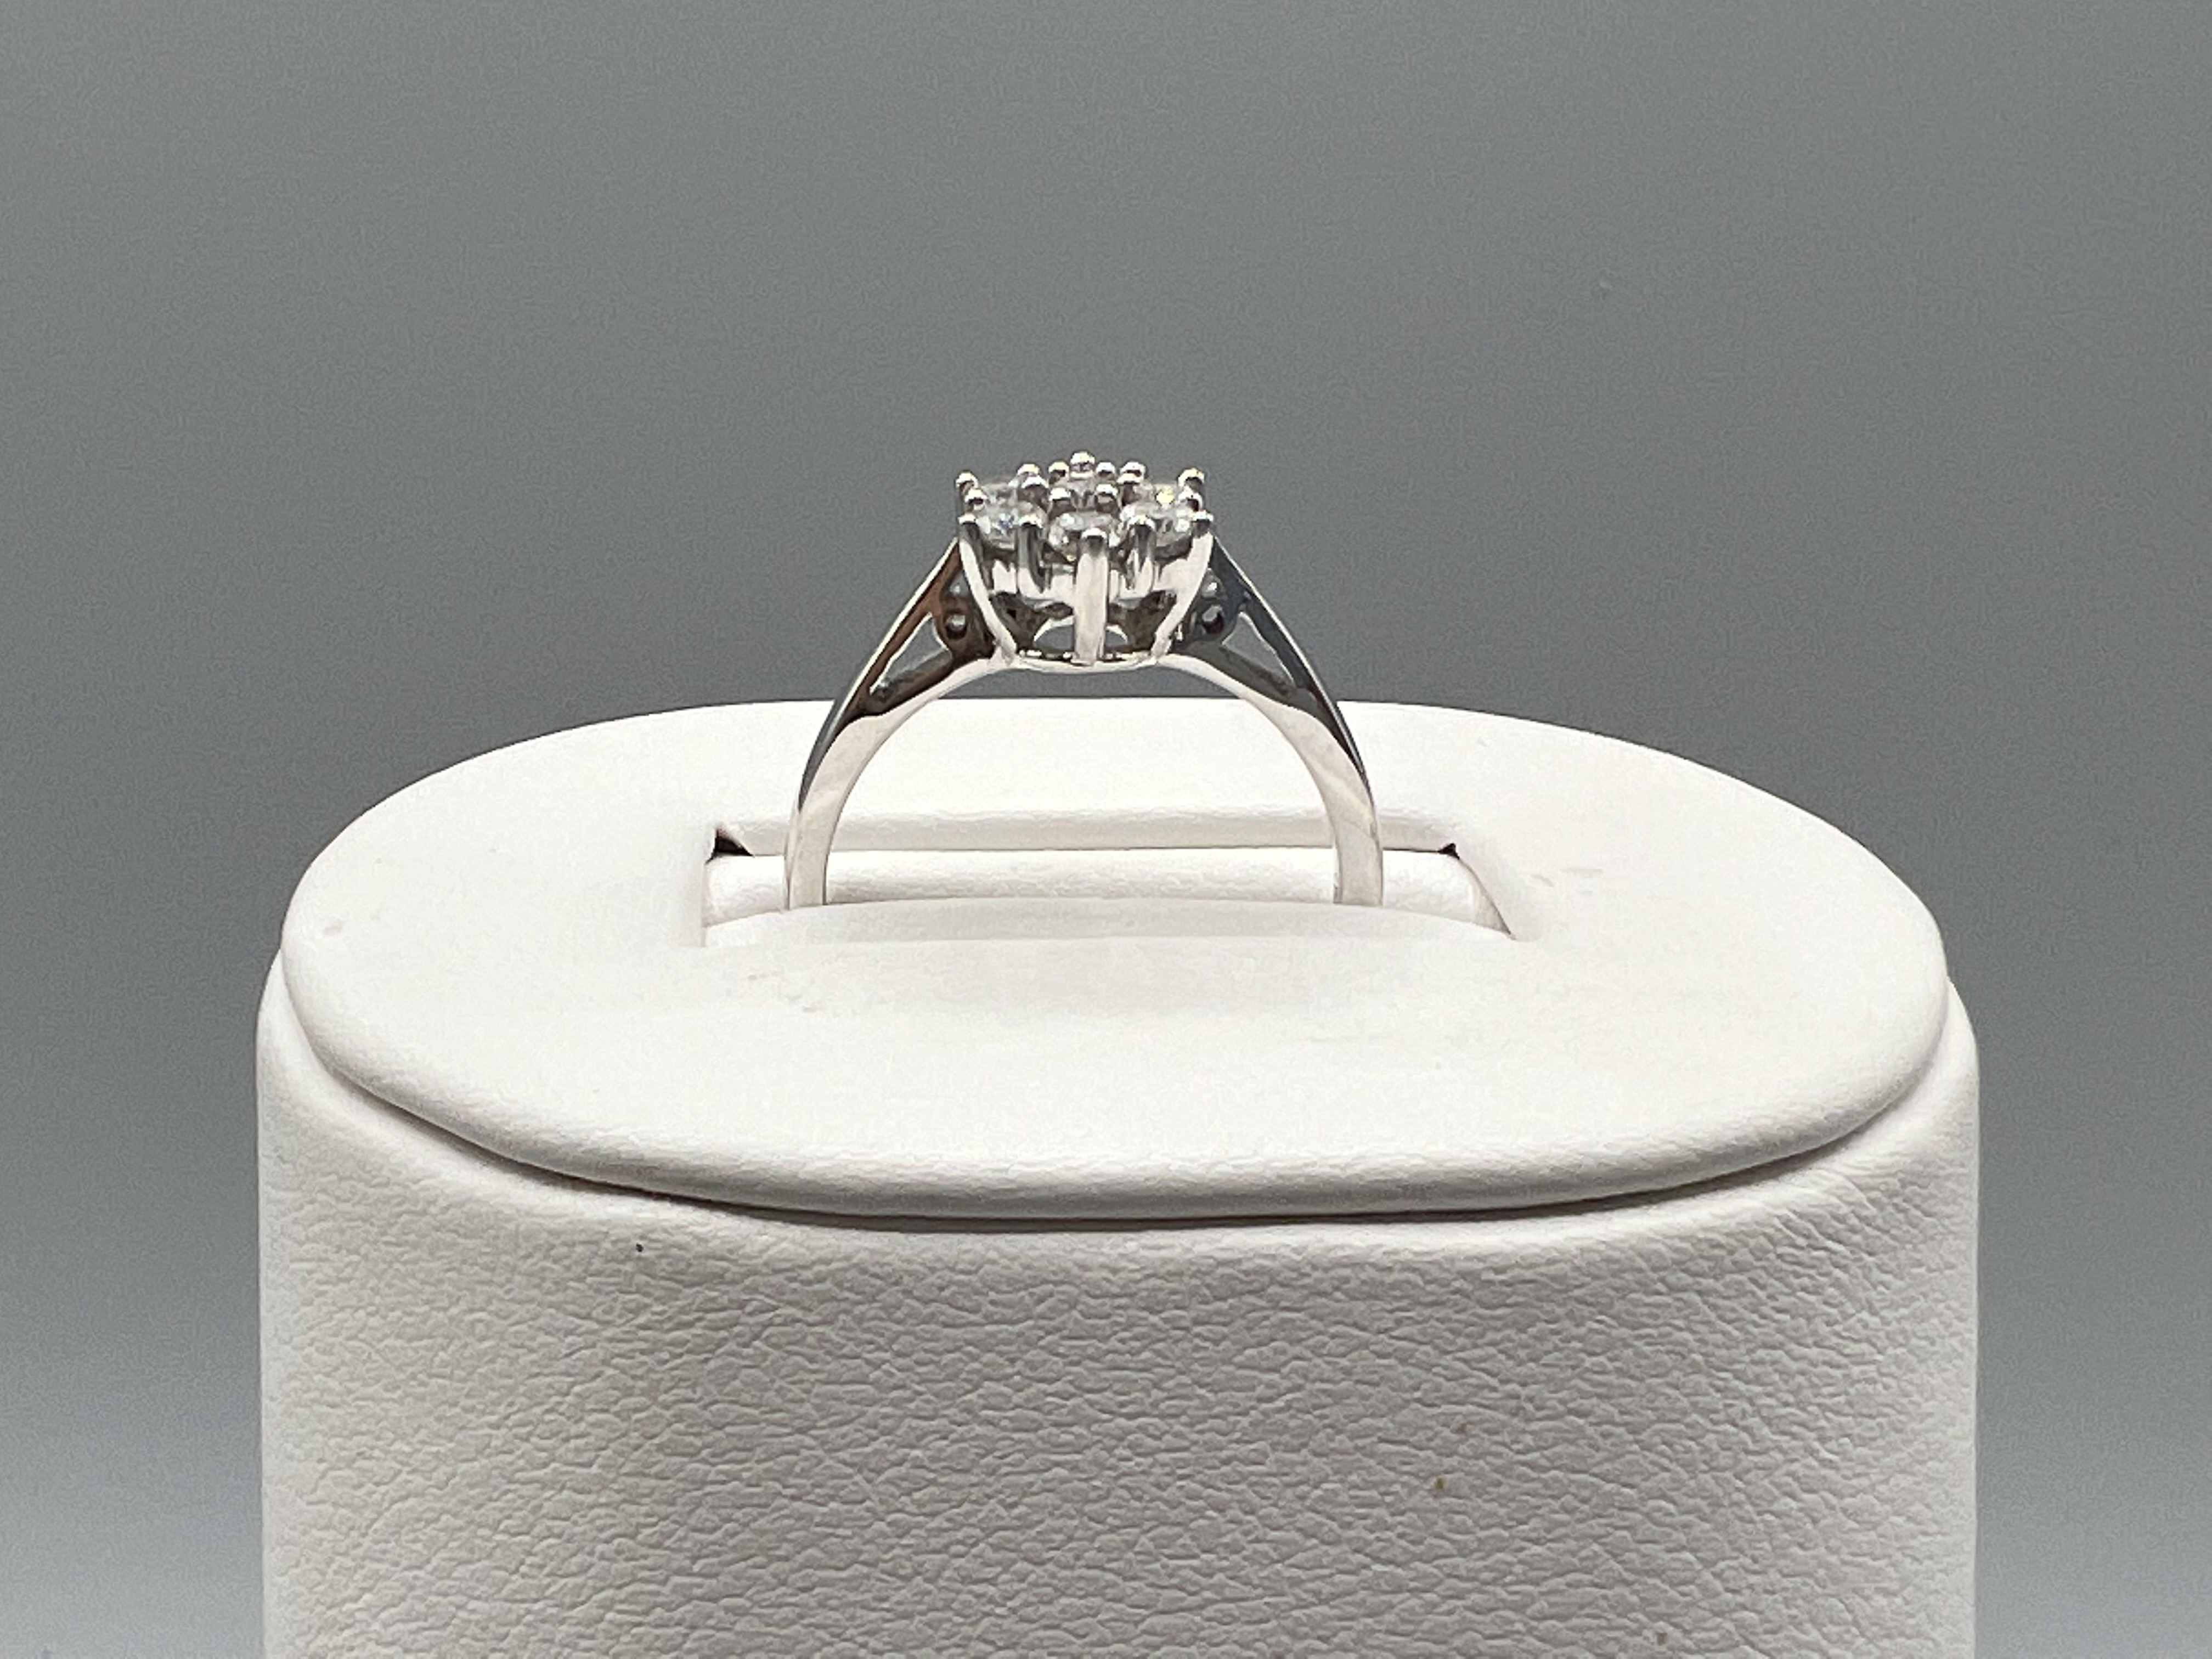 18ct White Gold & 7 Stone 1/2 Diamond Cluster Ring - 3.6grams Size N 1/2 - Image 3 of 3